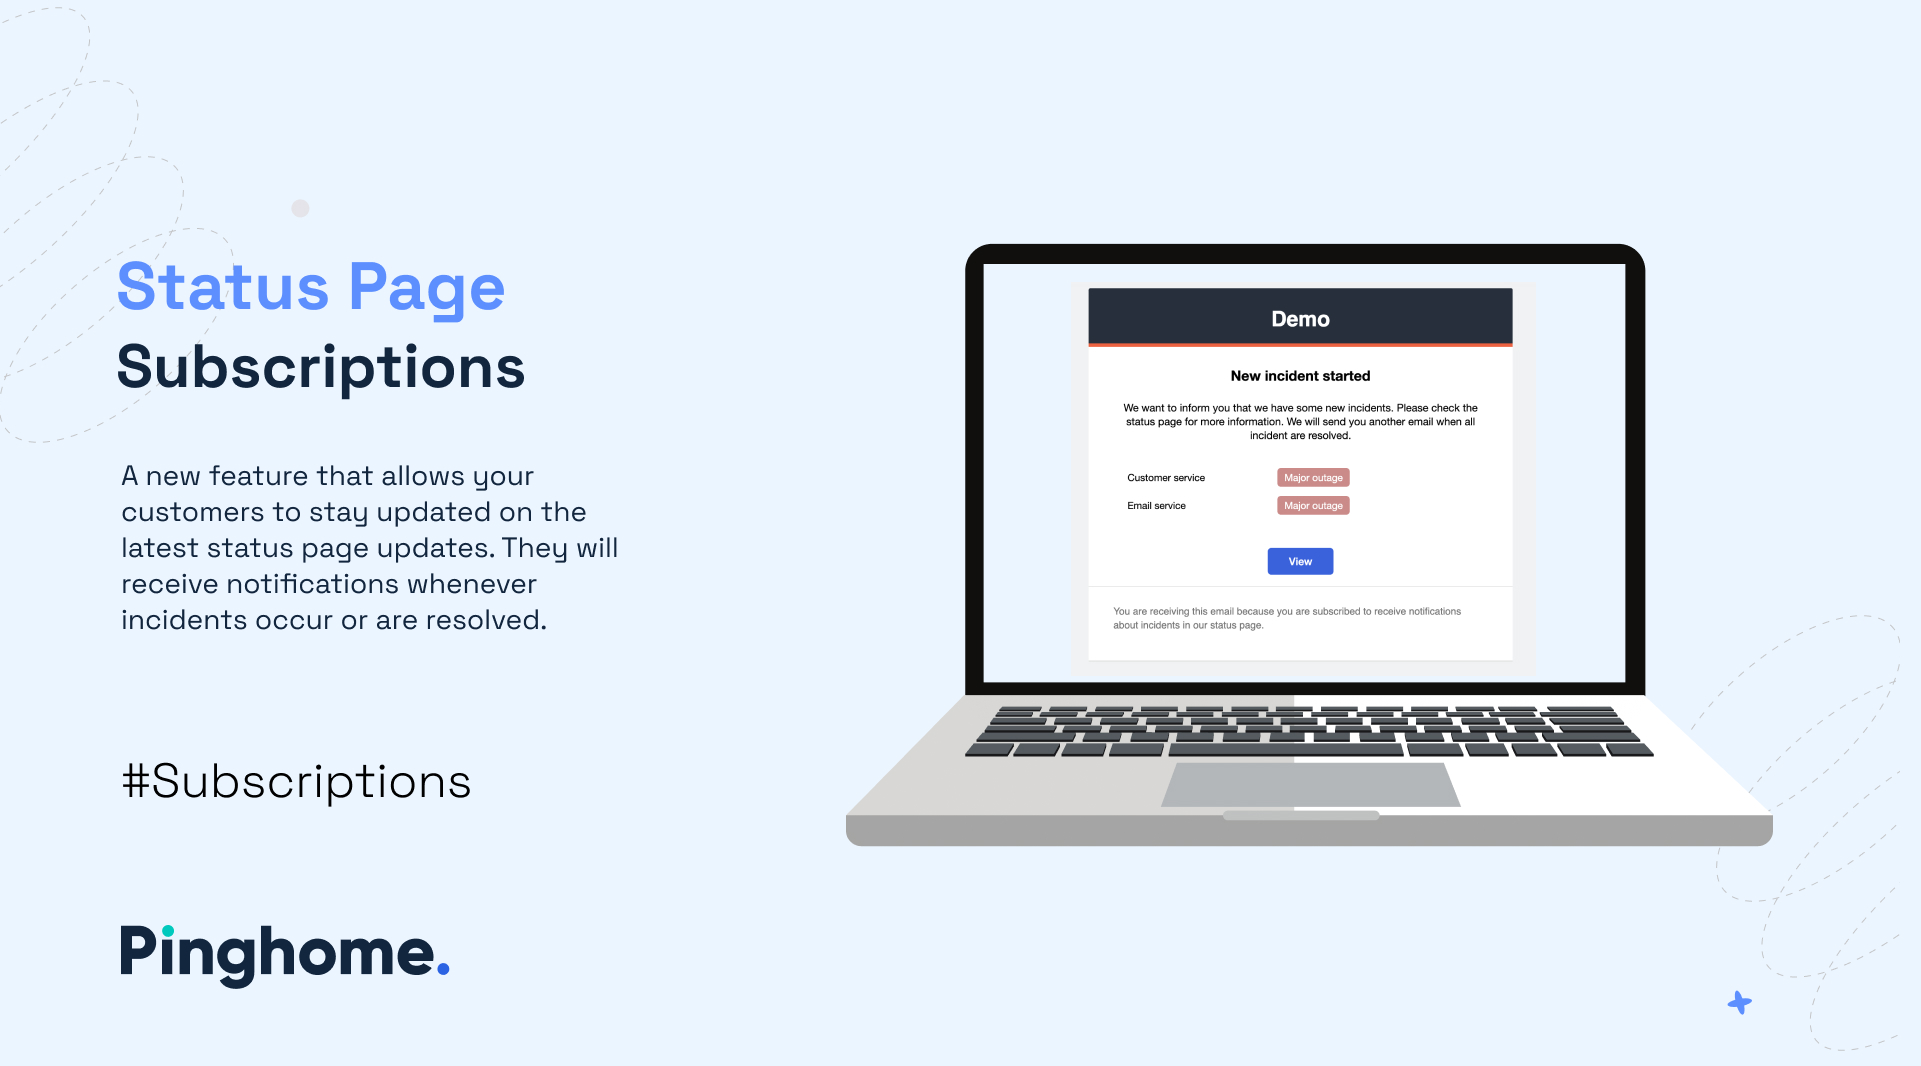 Status page subscriptions at Pinghome